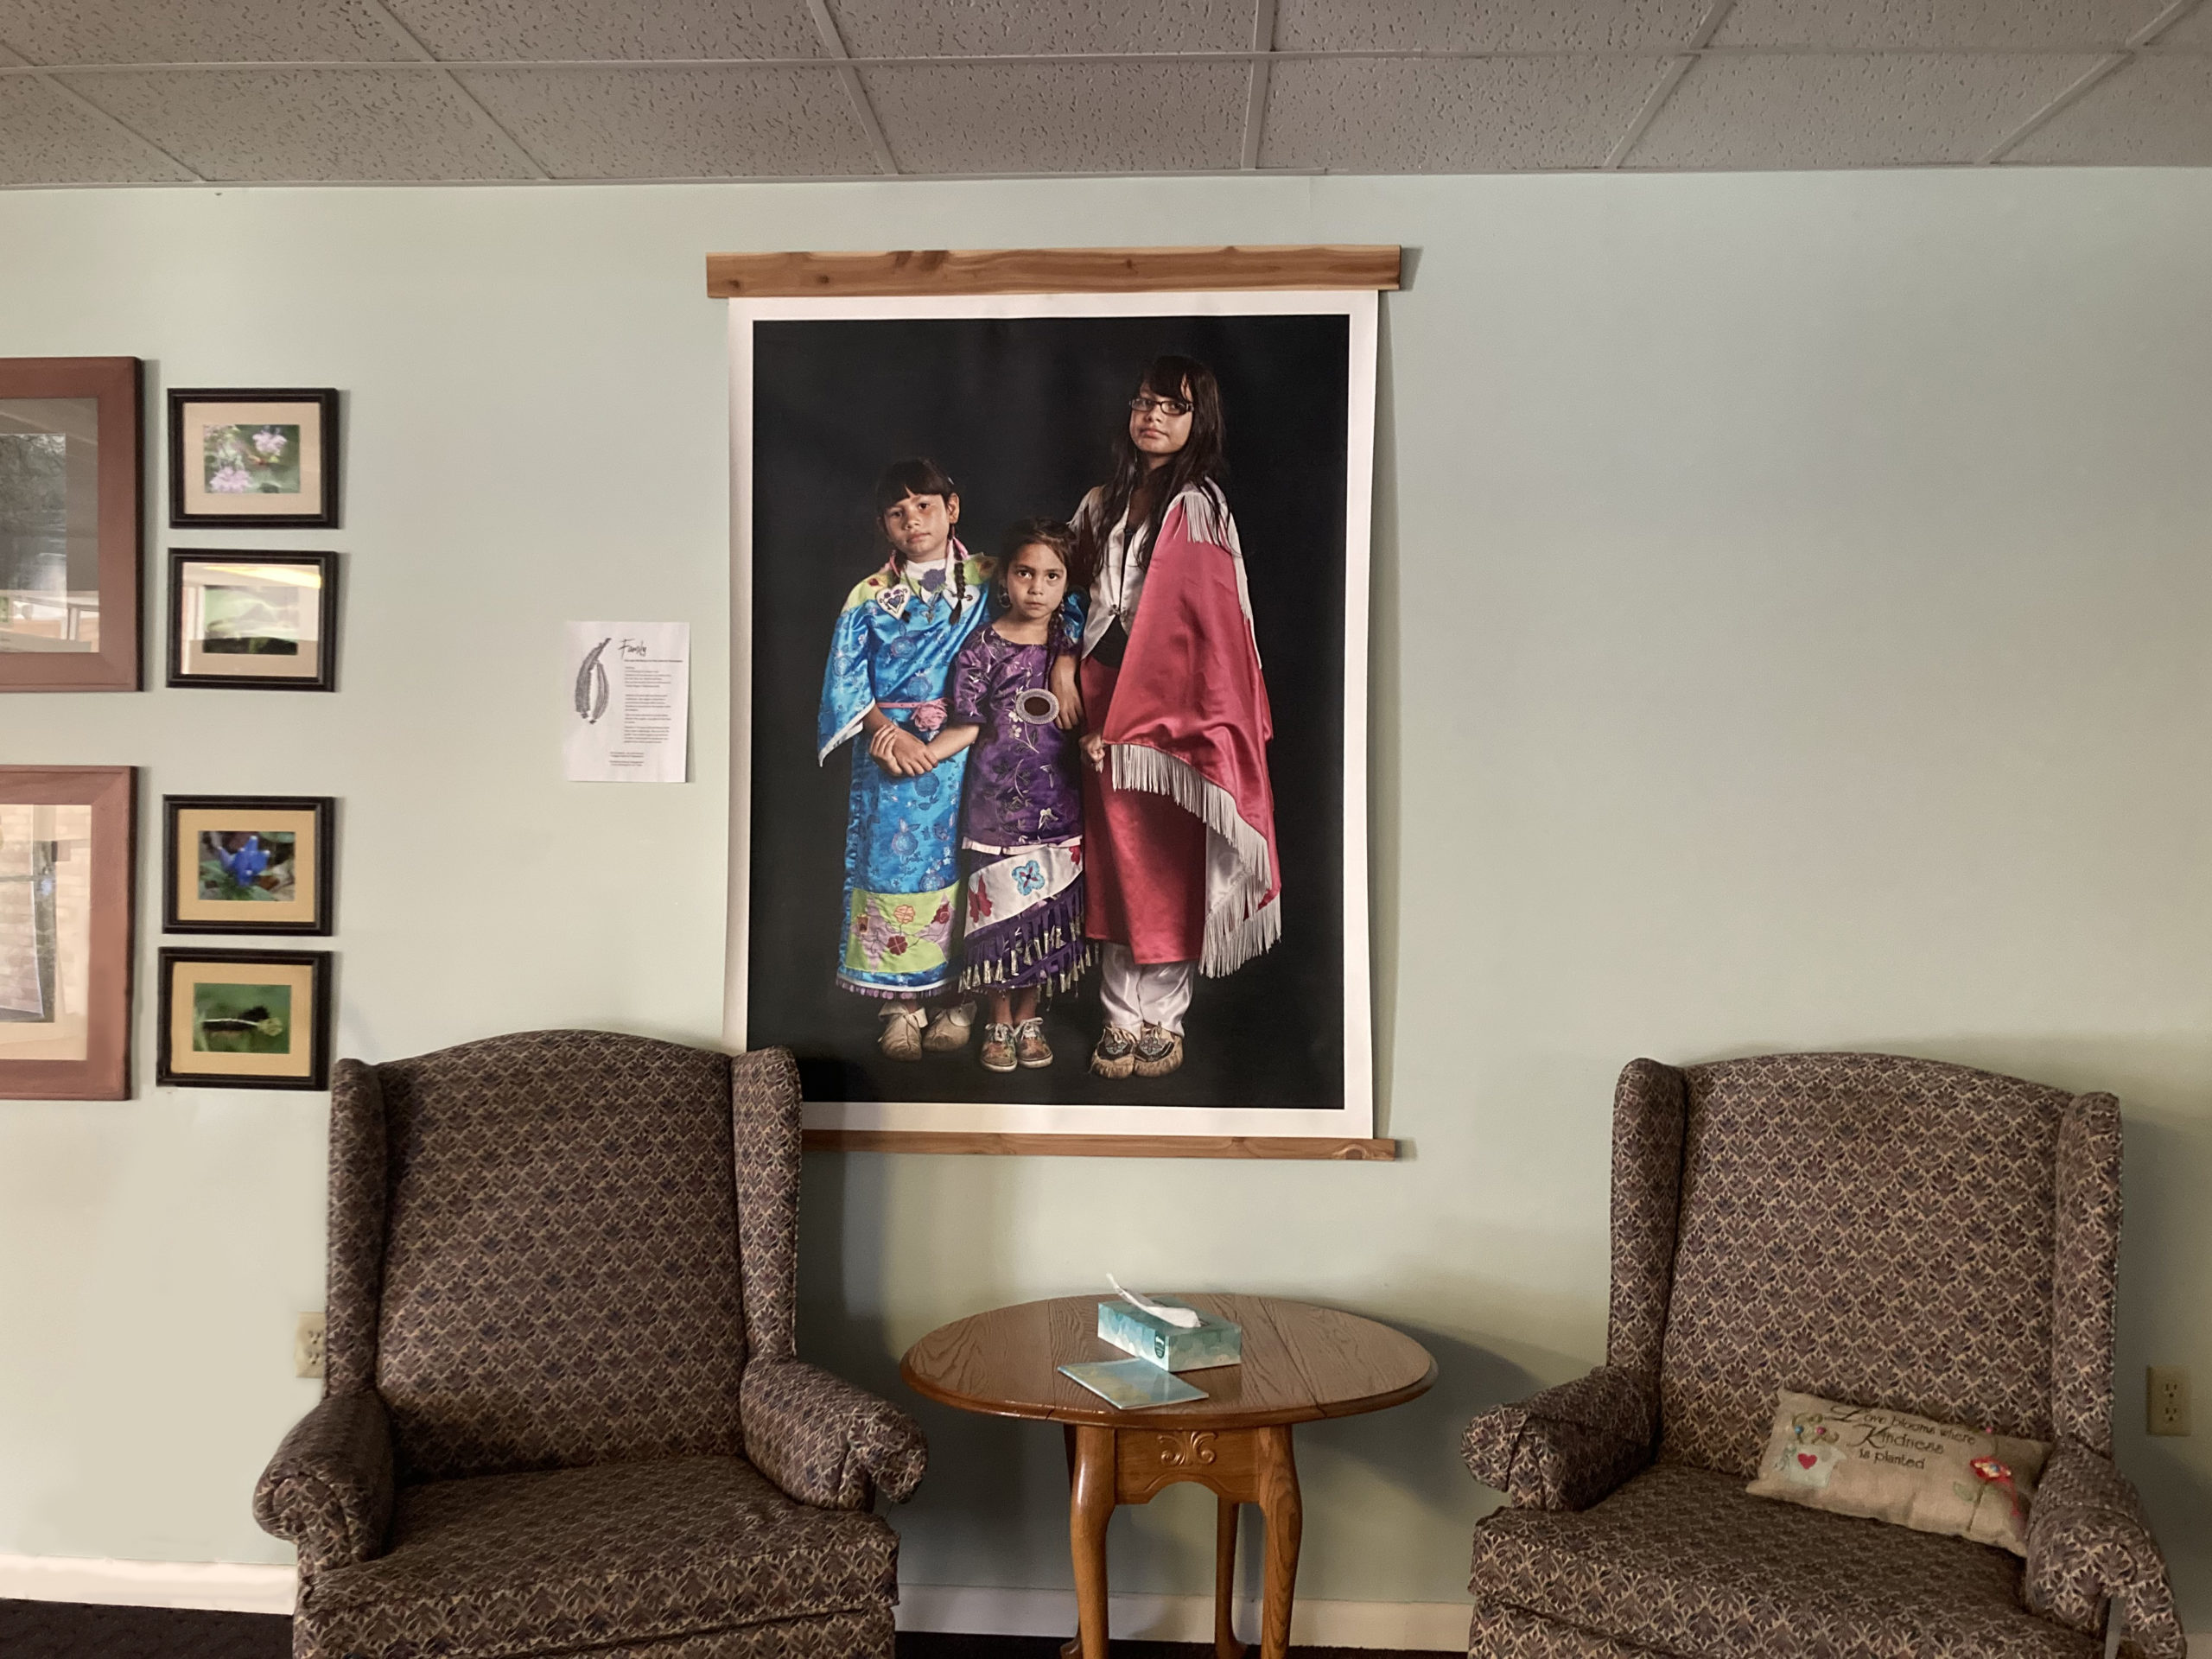 A photograph by Potawatomi artist Sharon Hoogstraten hangs in the foyer at Waterford Mennonite Church. The portrait features three Potawatomi dancers, Selphie, age 8, Lilly, age 6, and Mimike, age 10. Sharon, from Kalamazoo, Michigan, said in a statement for the Citizen Potawatomi Nation Cultural Heritage Center: “Preserving the faces, stories, and regalia of modern Potawatomi will contribute to a better understanding of their transformed place in the diverse life of America.” Photo by Sierra Ross Richer.